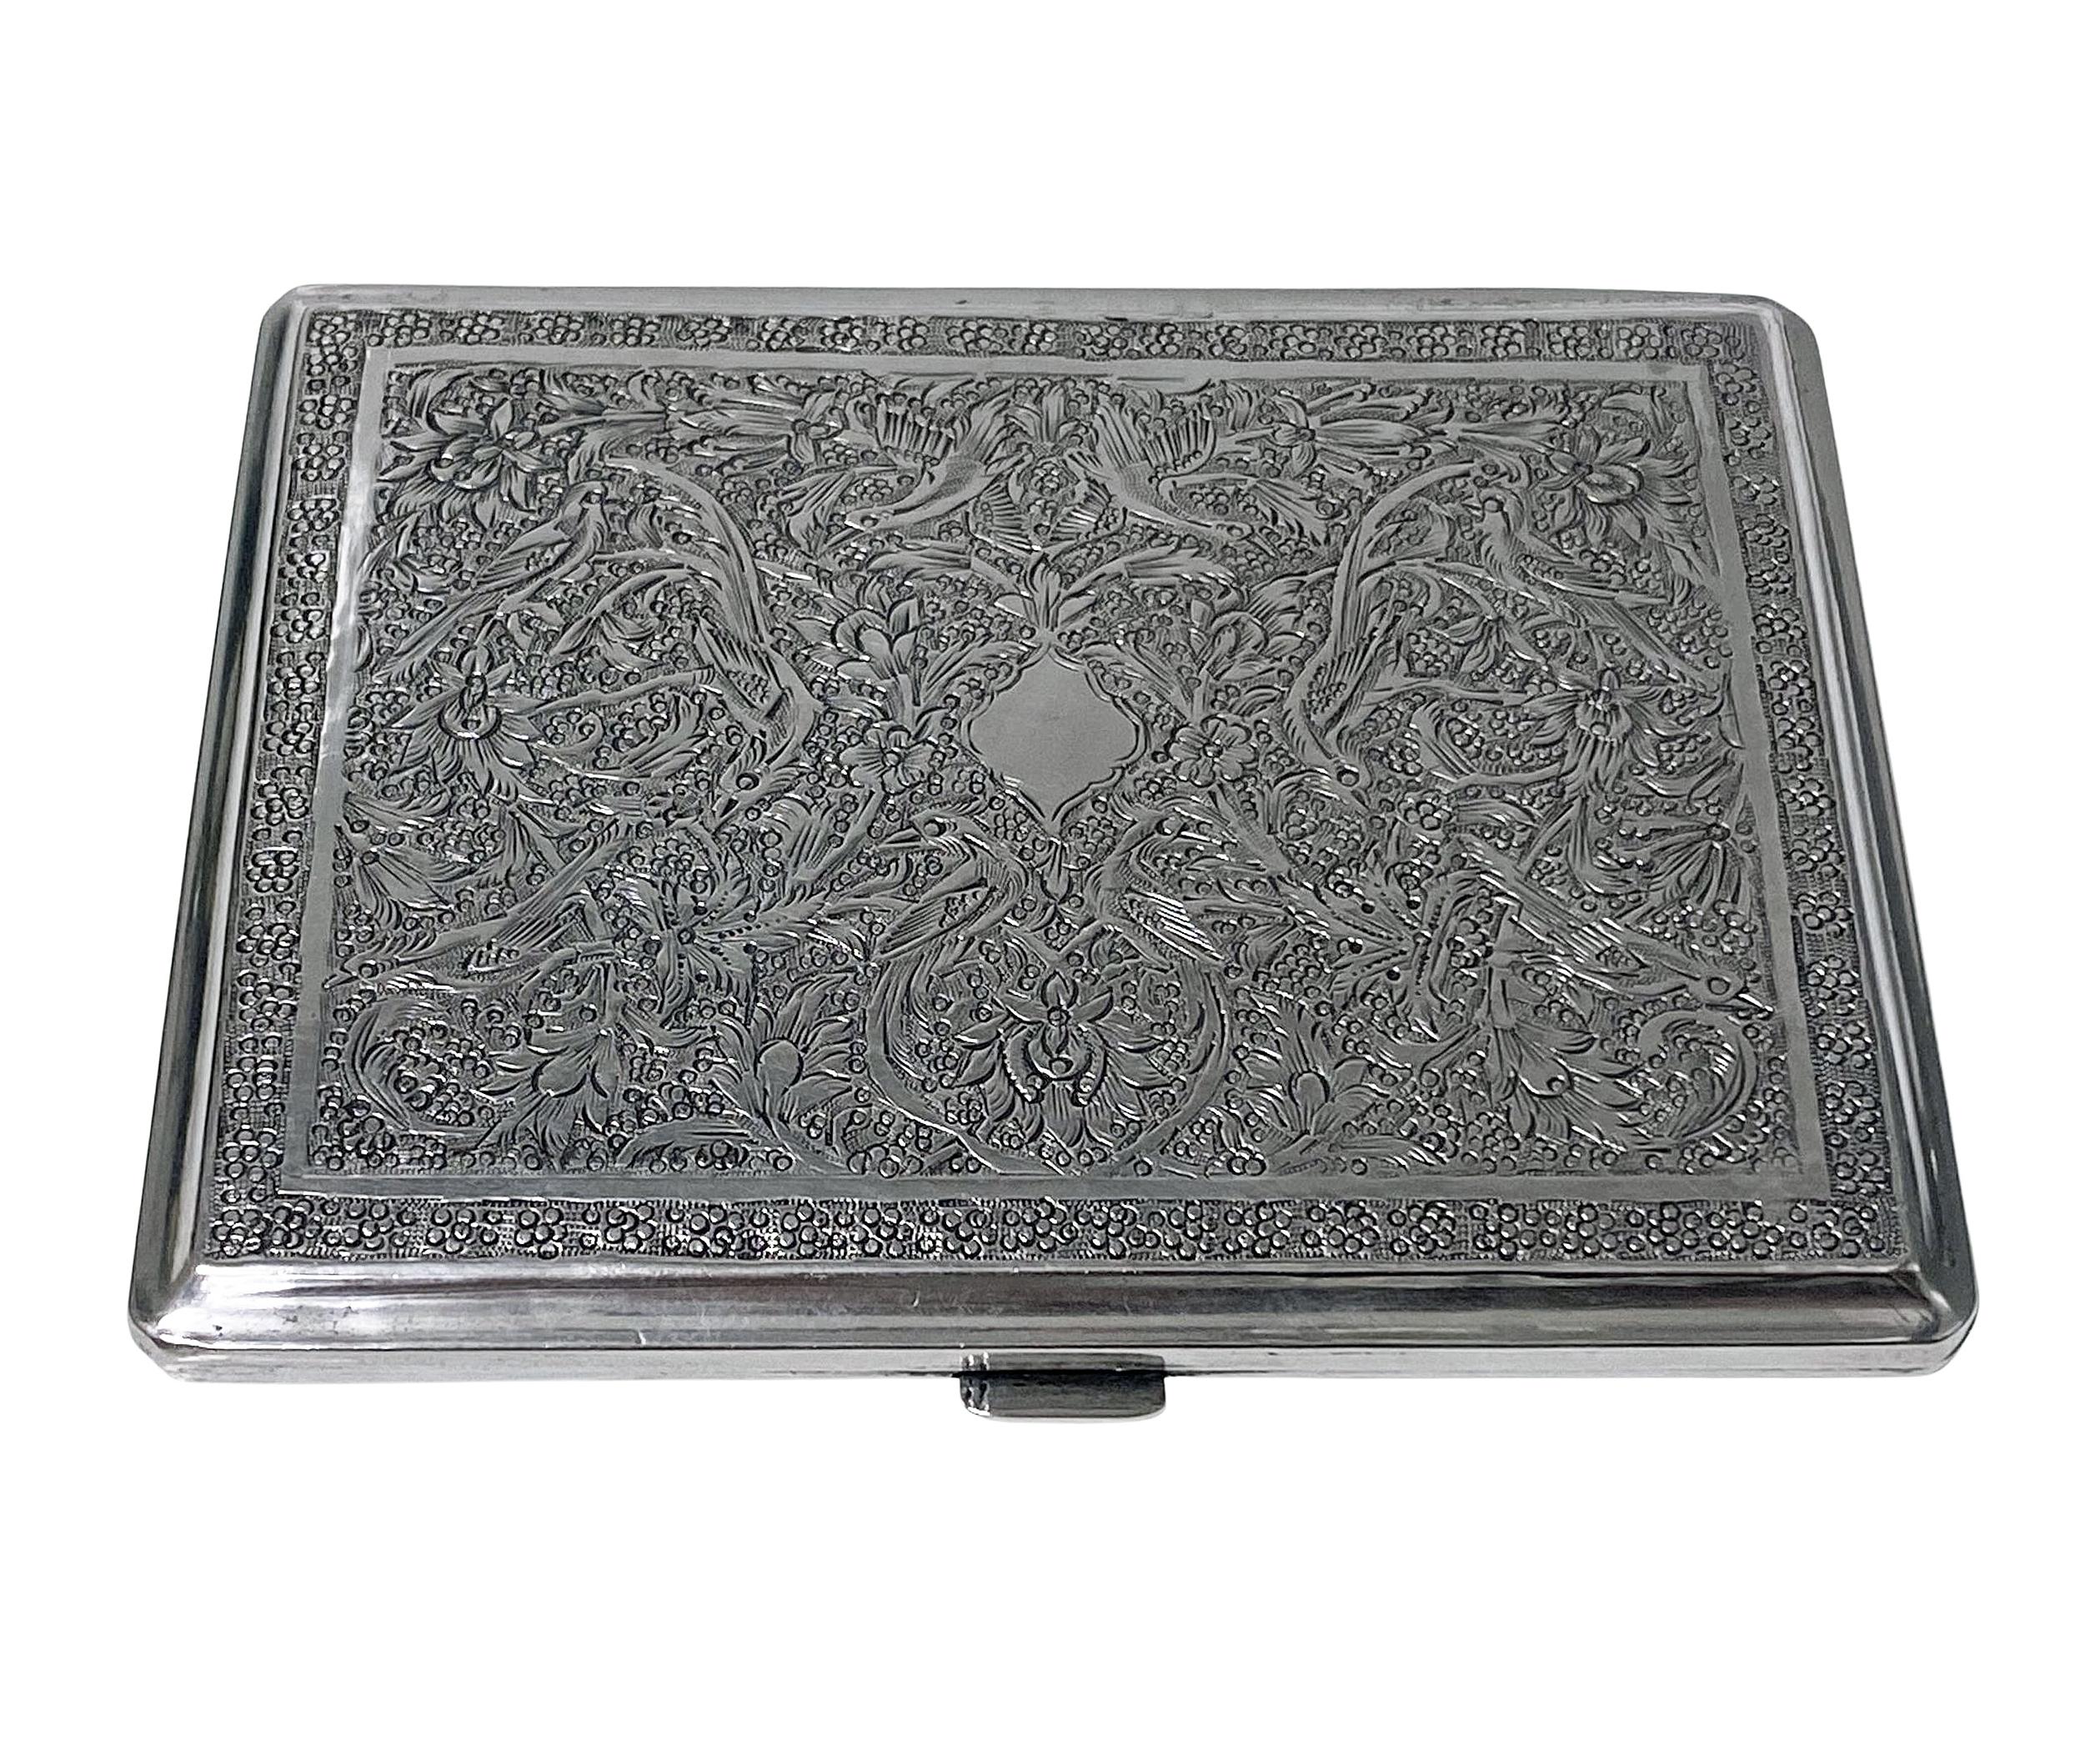 Antique Persian Silver Cigarette Case C.1920. The case beautifully chased, engraved and decorated with birds, animals and foliage. Persian marks to interior. Material band worn. Measures: 4.00 x 3.125 x 0.25 inches. Weight: 128.62 grams.
